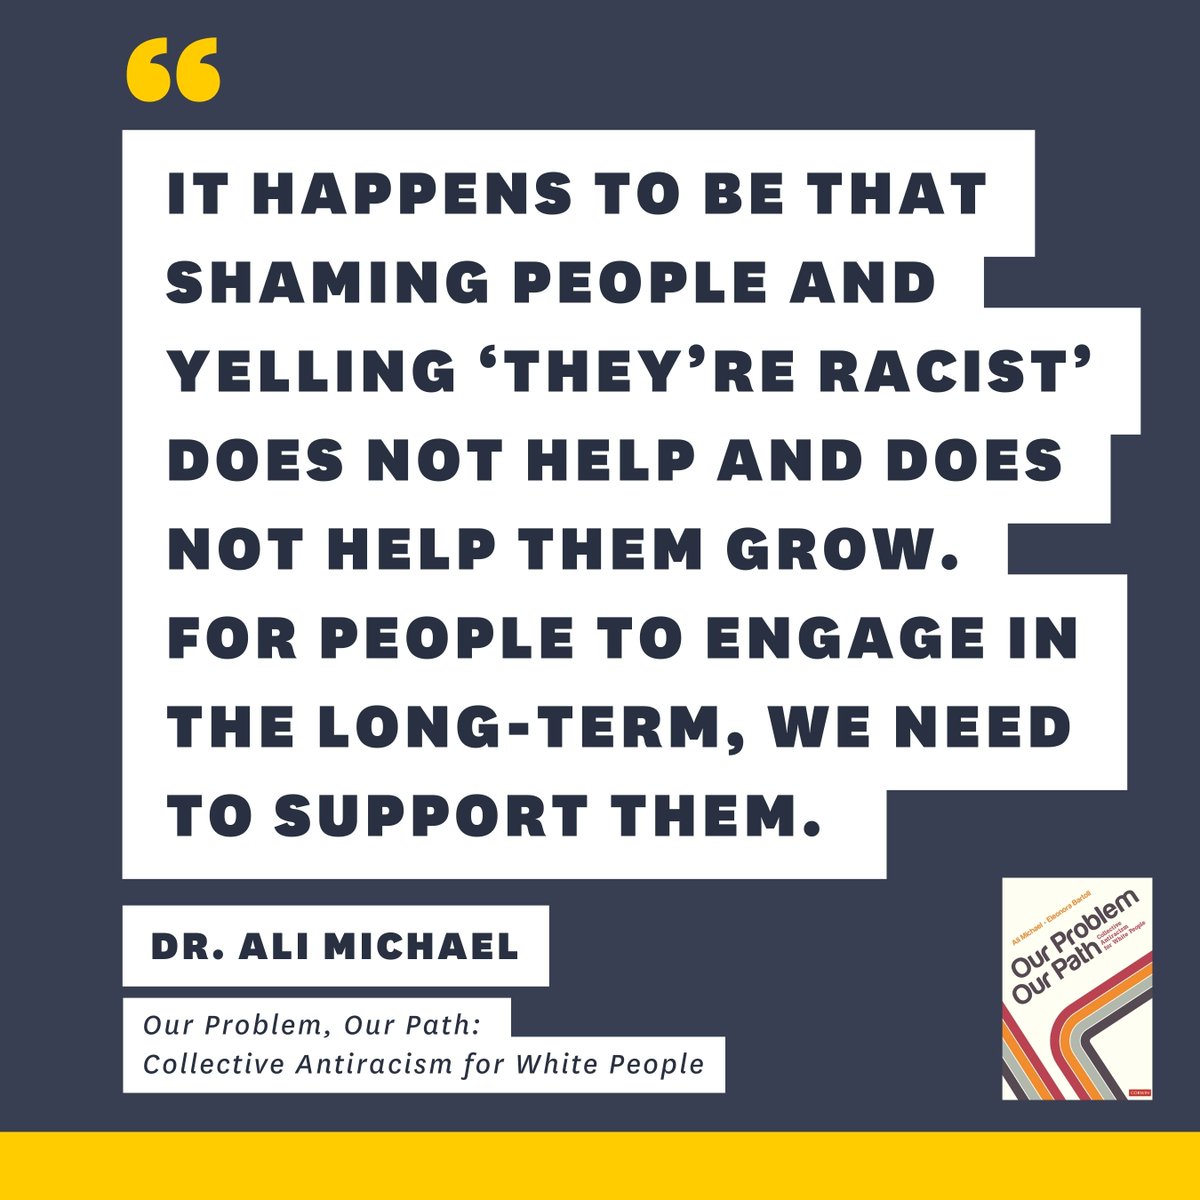 Missed our Equity Book Talk with Dr. Ali Michael? 📚 Watch the discussion on YouTube: uscrec.info/ali-video. Don't forget to sign up for our next session with Toby Jenkins and her book 'The Hip-hop Mindset'. Secure your spot here: uscrec.info/hiphopmindset.